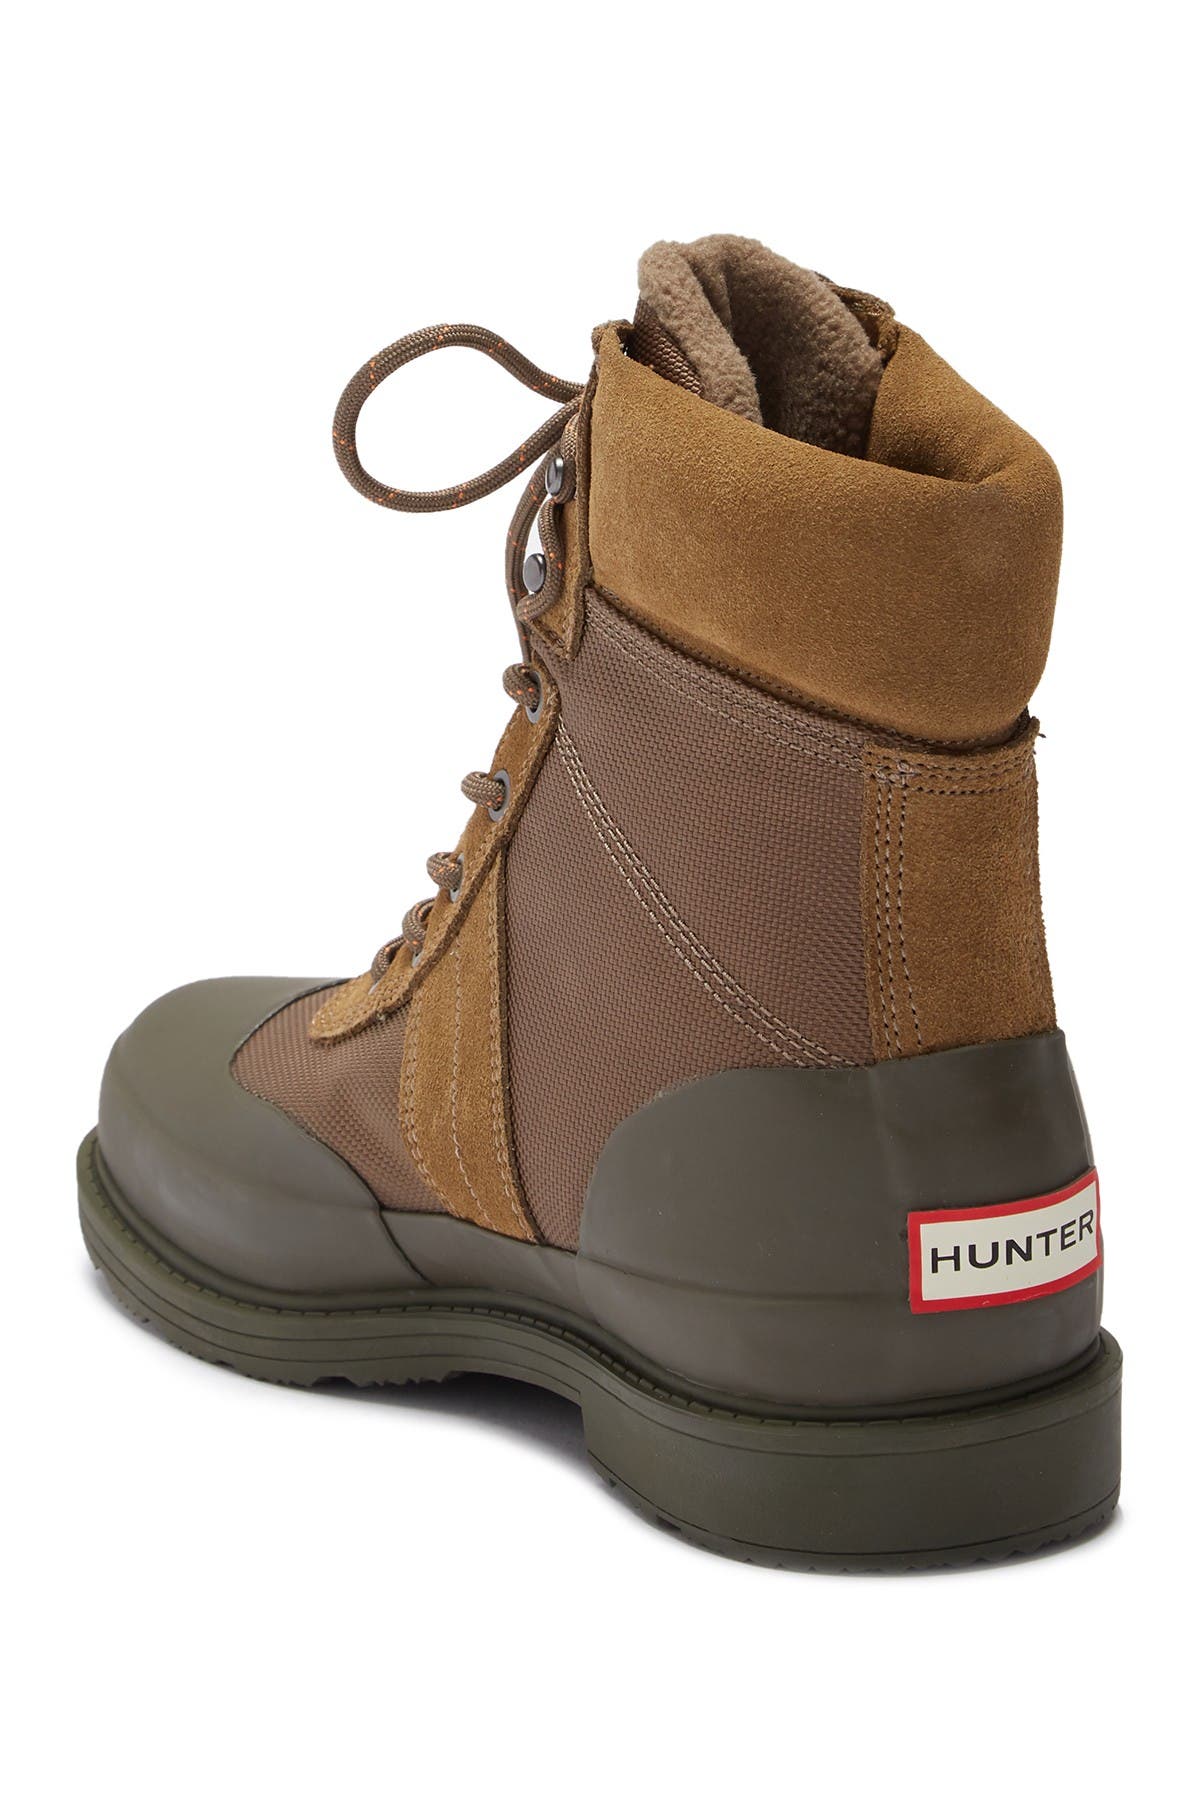 hunter insulated leather commando boots